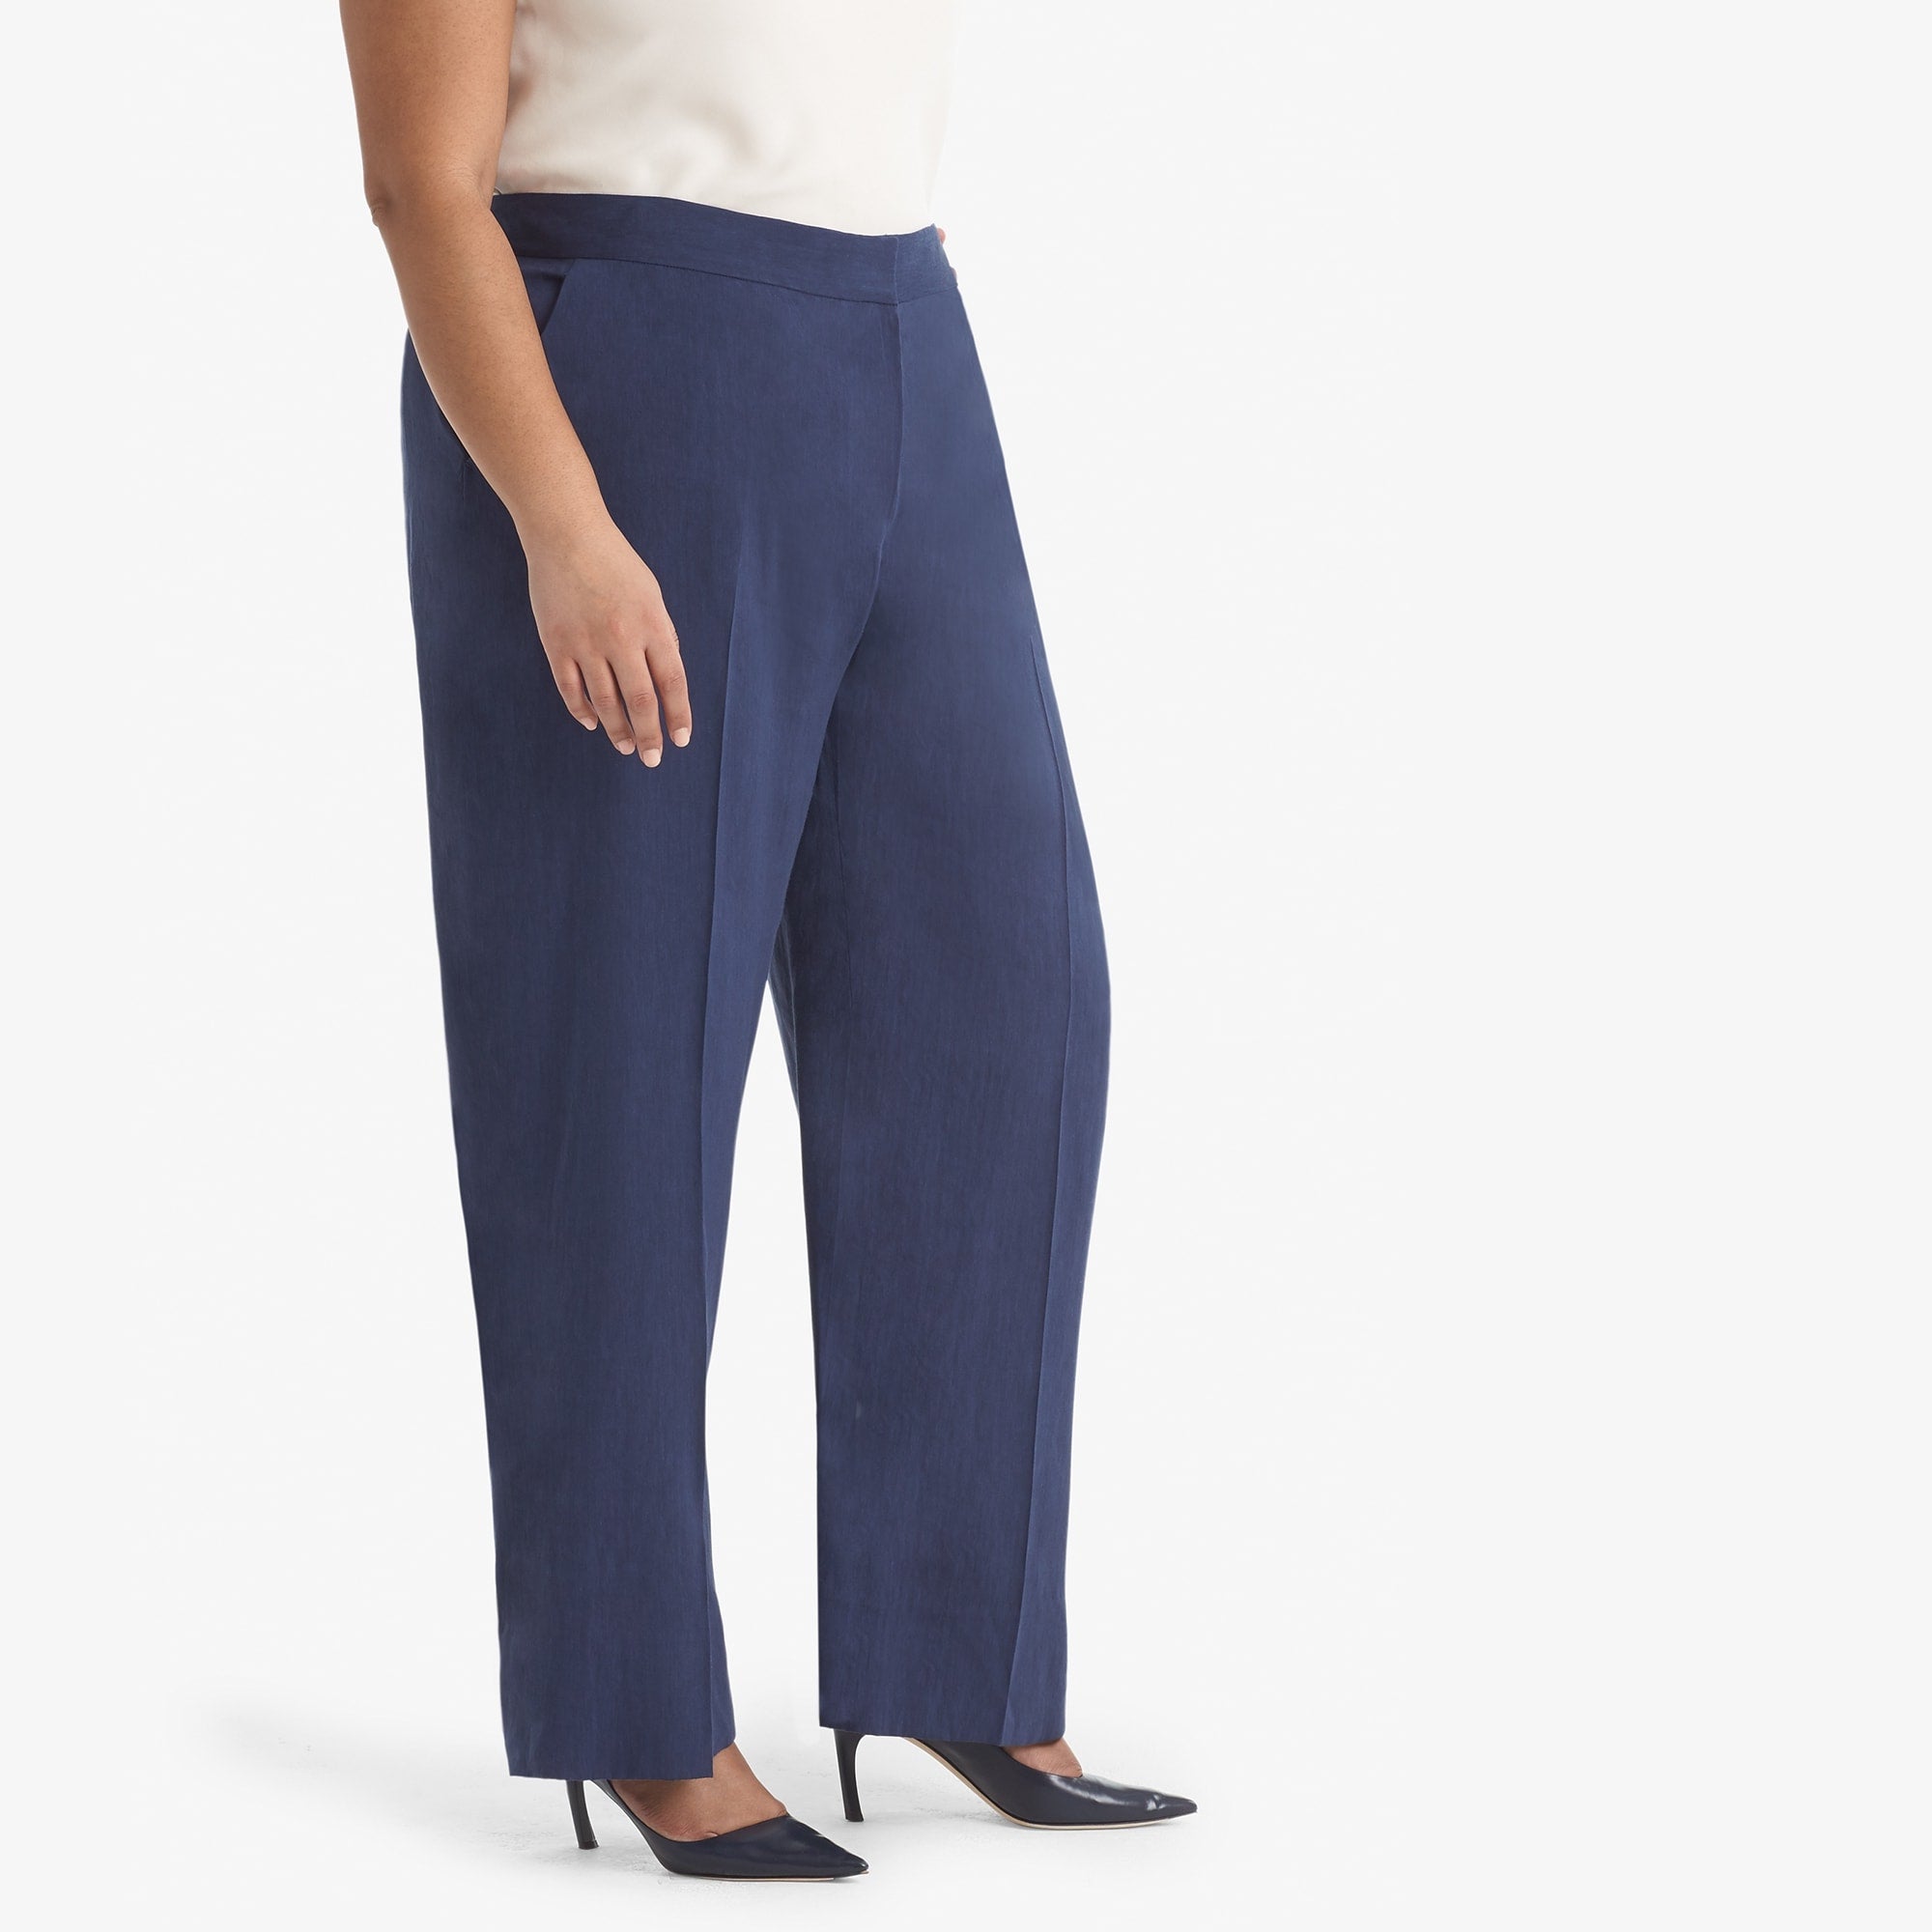 Side image of a woman standing wearing the Tinsley trouser stretch linen in blueberry